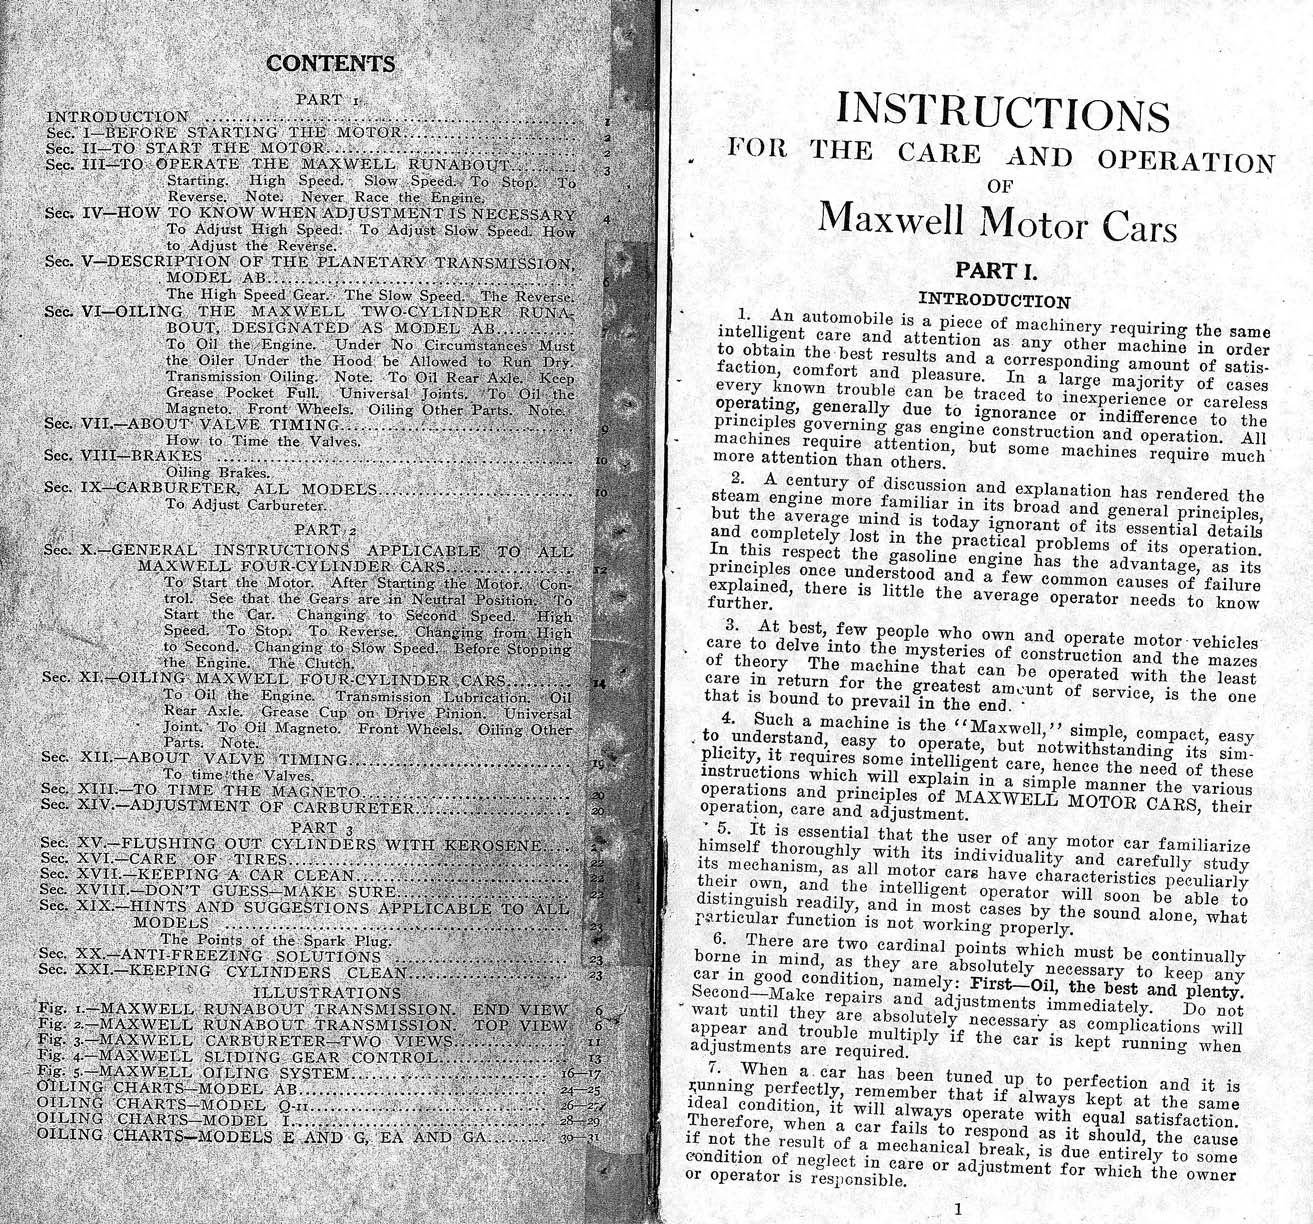 1911 Maxwell Instructions-00a-01